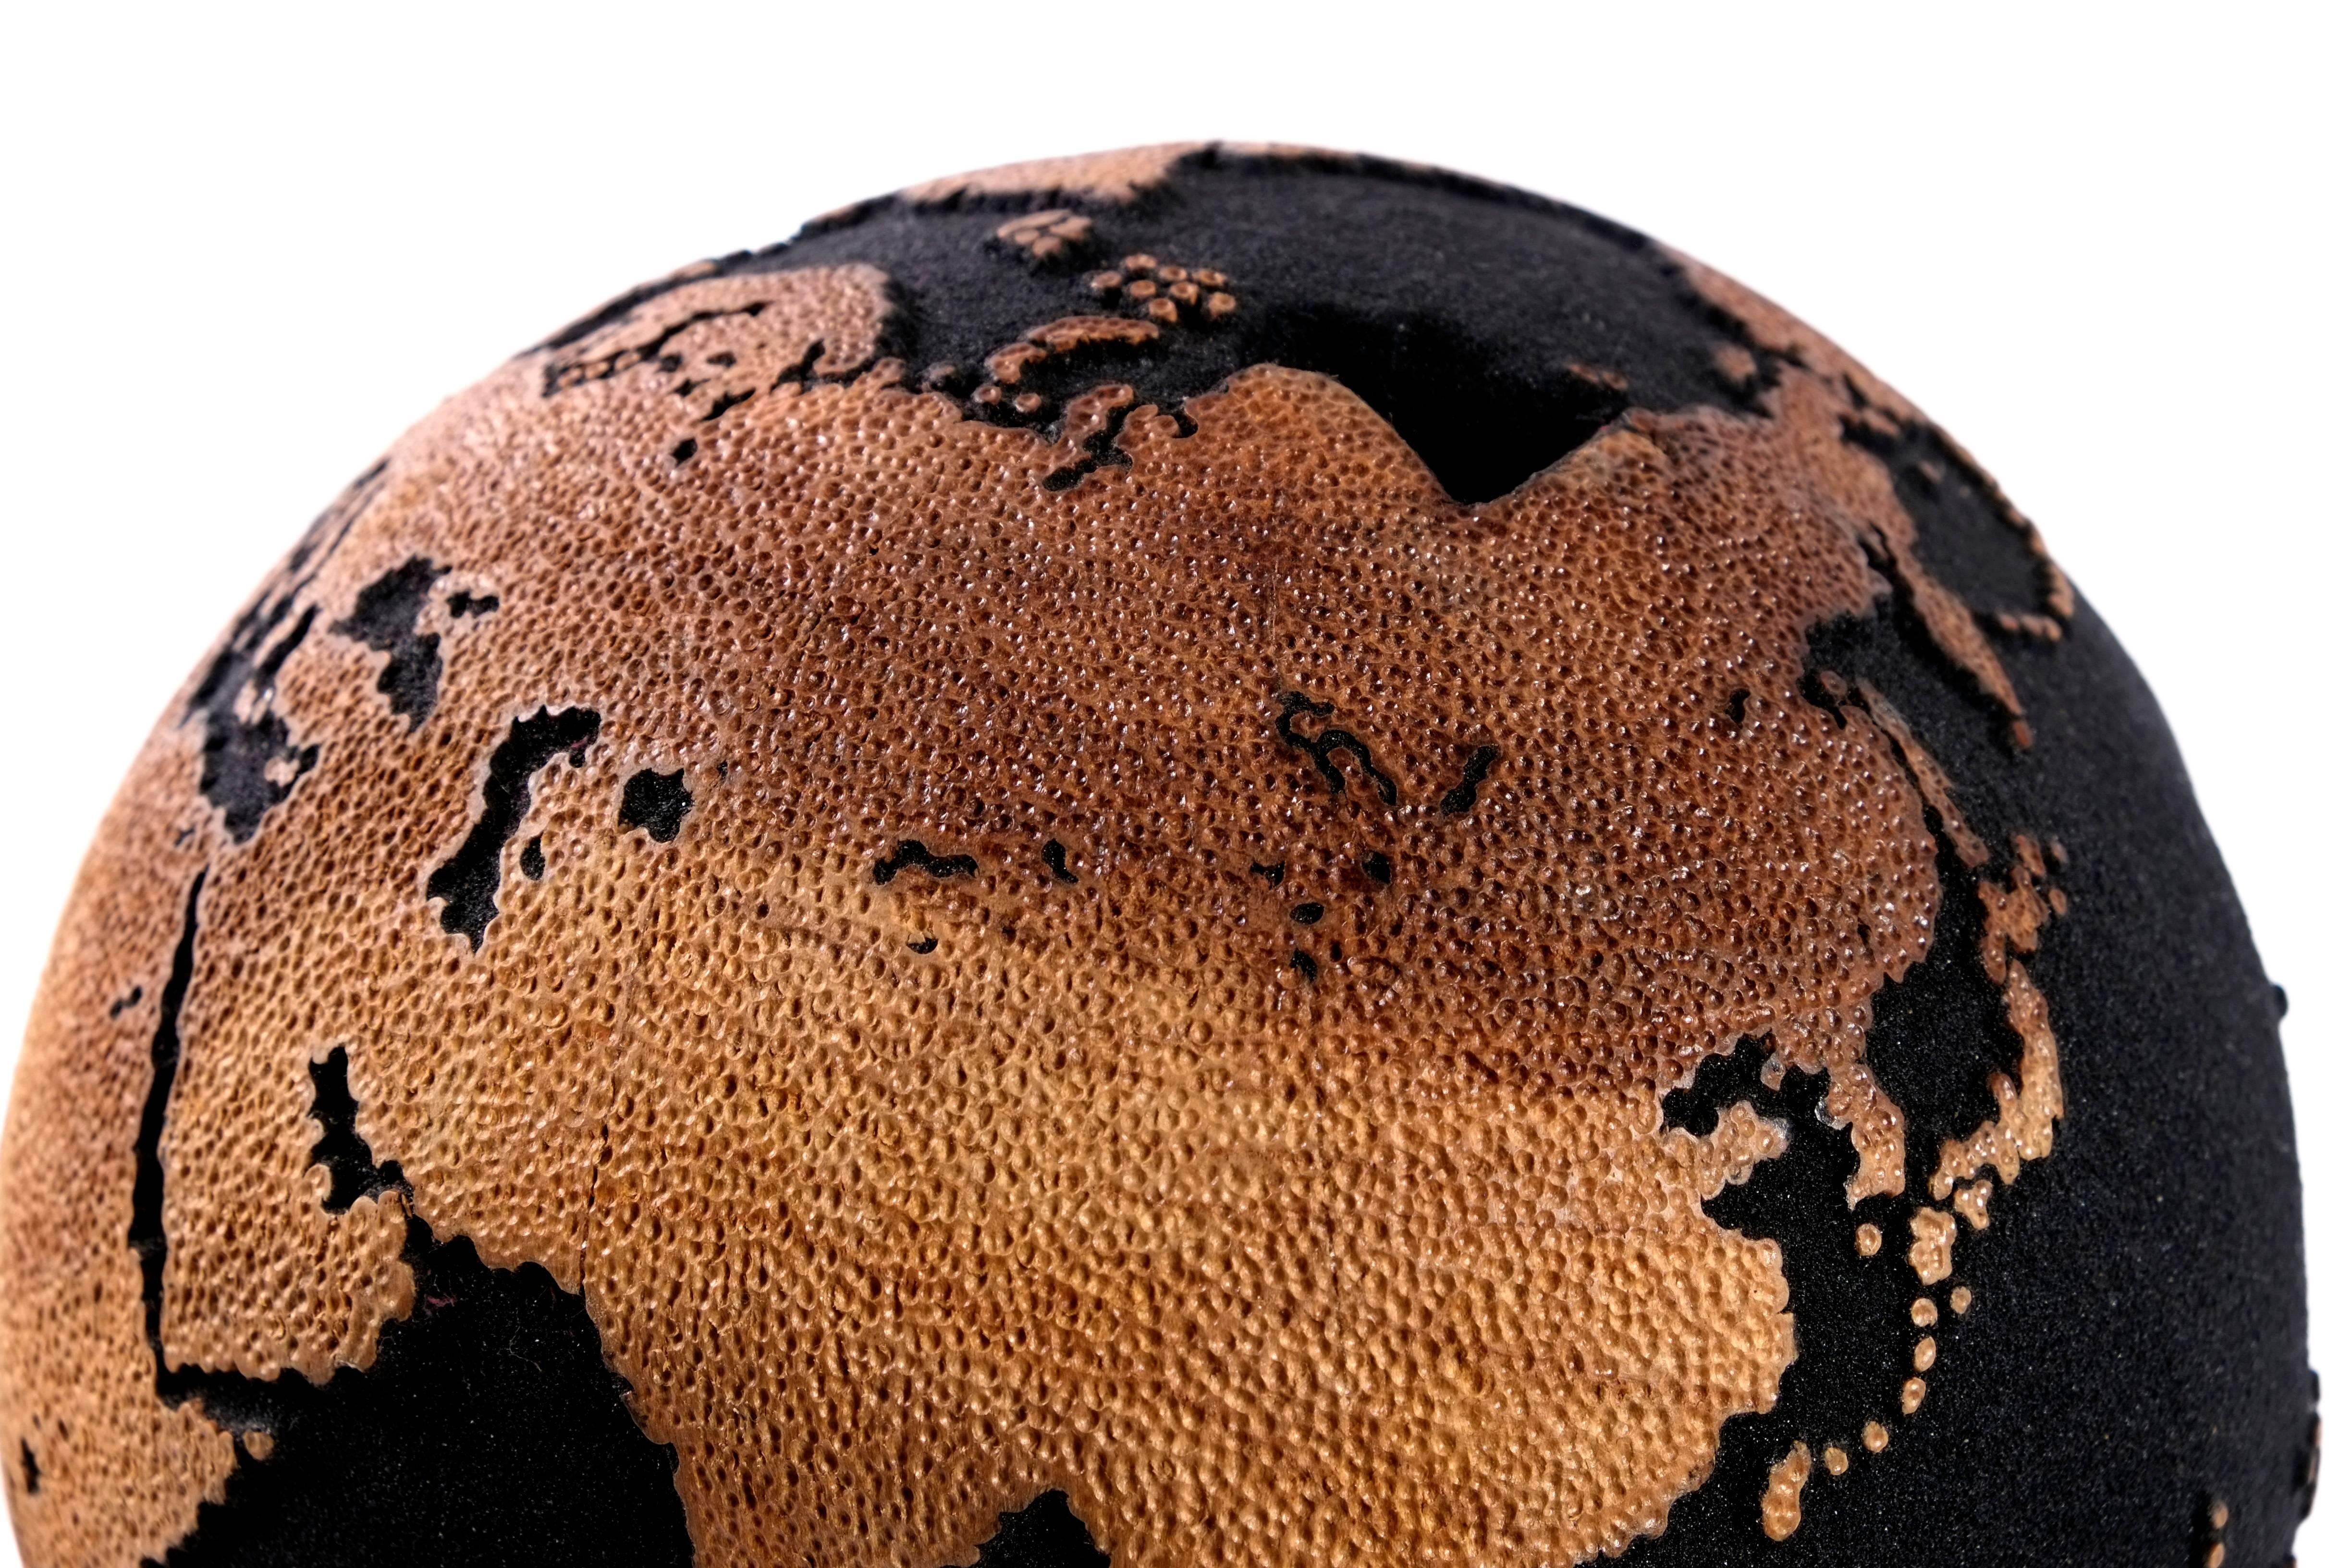 Balinese Volcanic Sand Globe with Hammered Skin Textured Continents, 25 cm, Saturday Sale For Sale